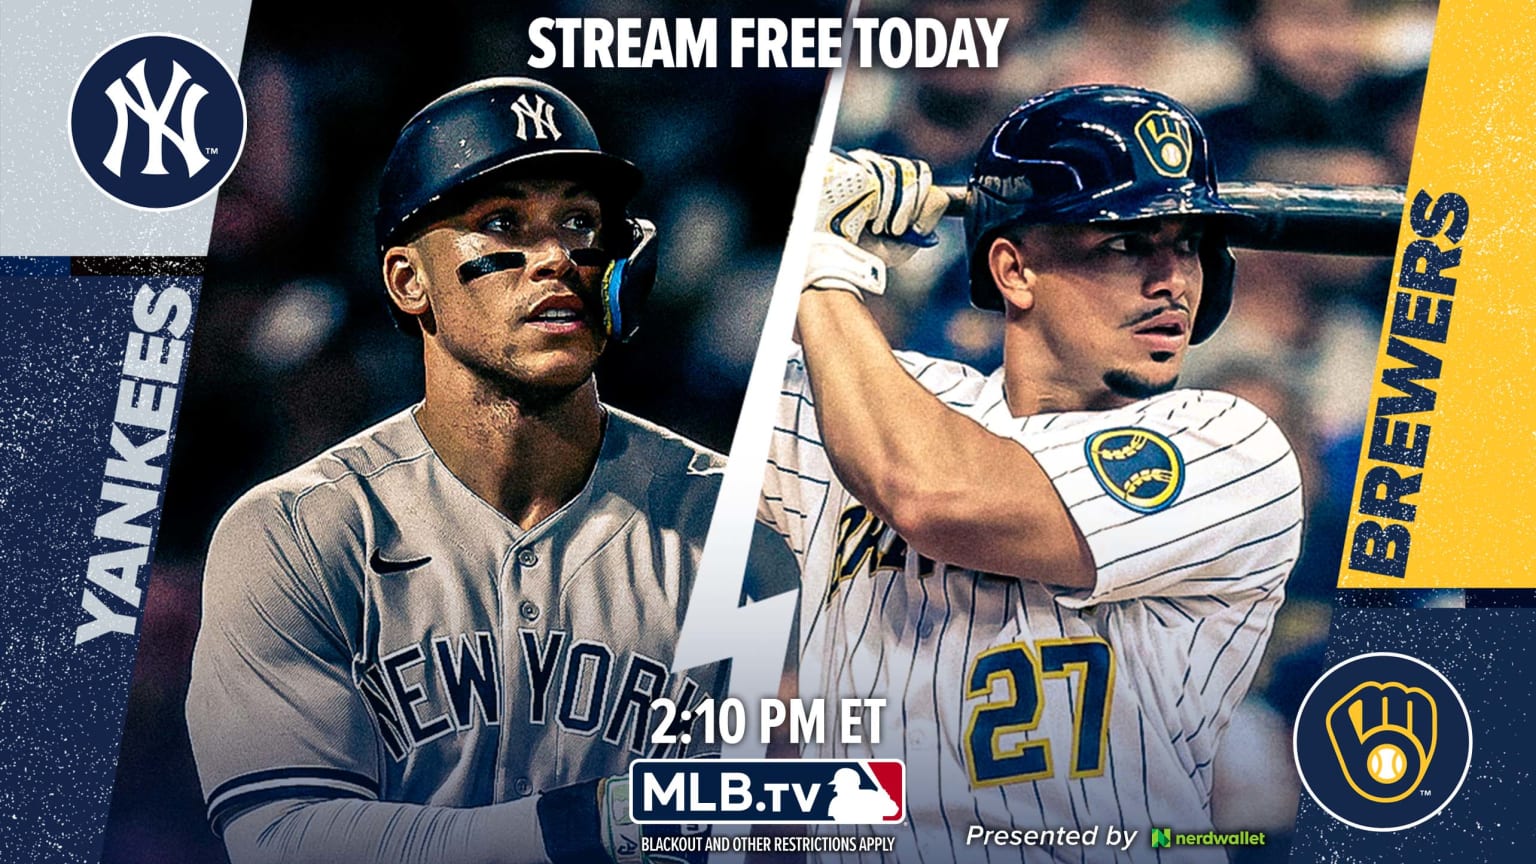 Graphic showing Aaron Judge and Willy Adames with the MLB.TV logo and 2:10 pm gametime